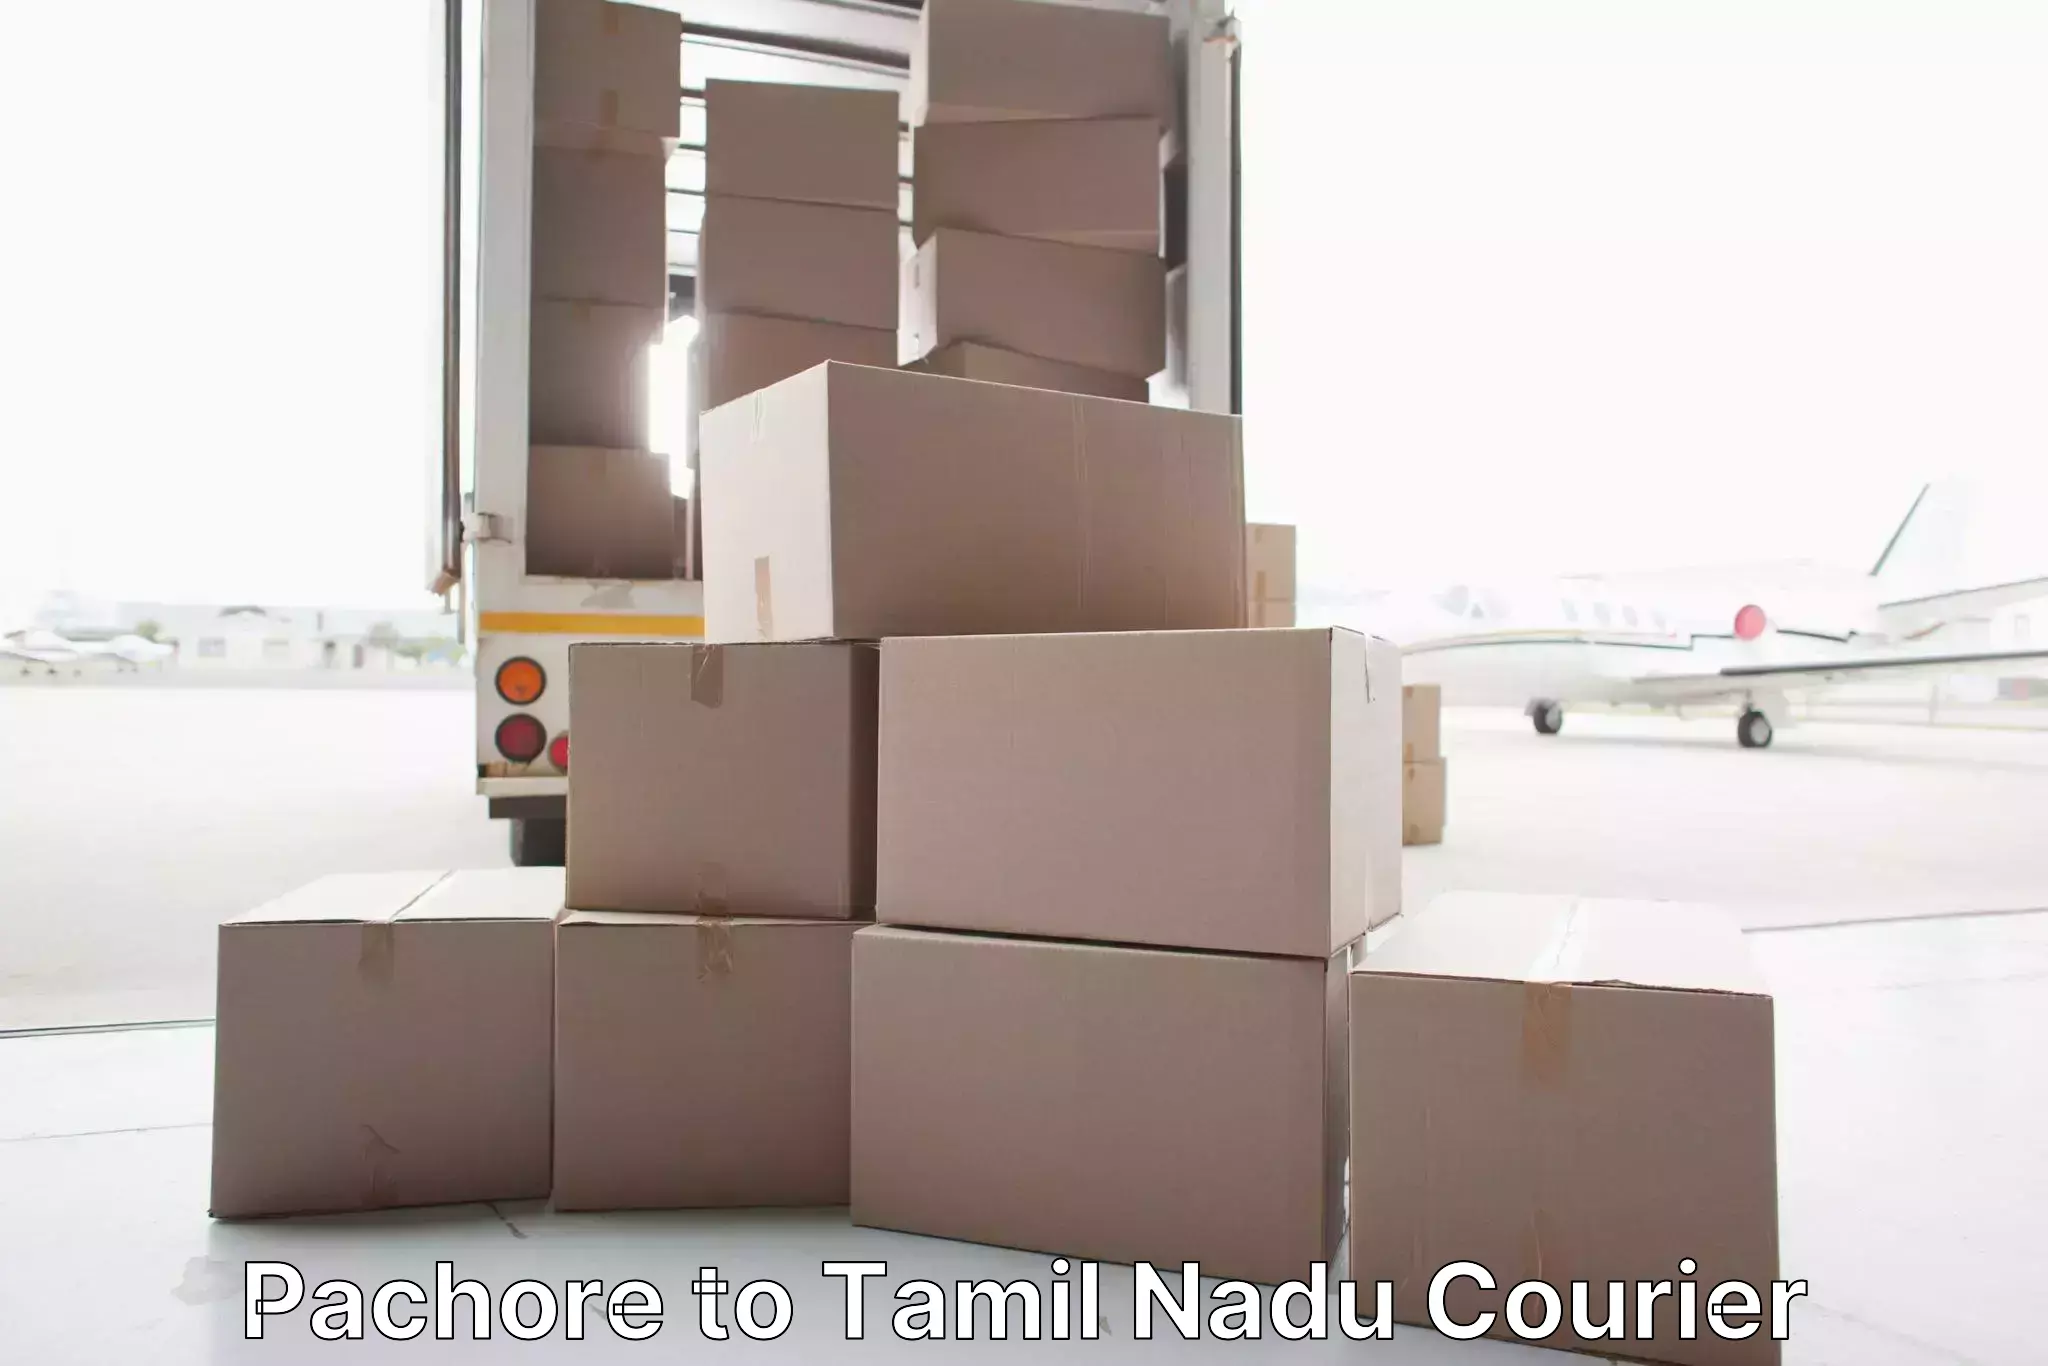 Quality moving services Pachore to Tamil Nadu